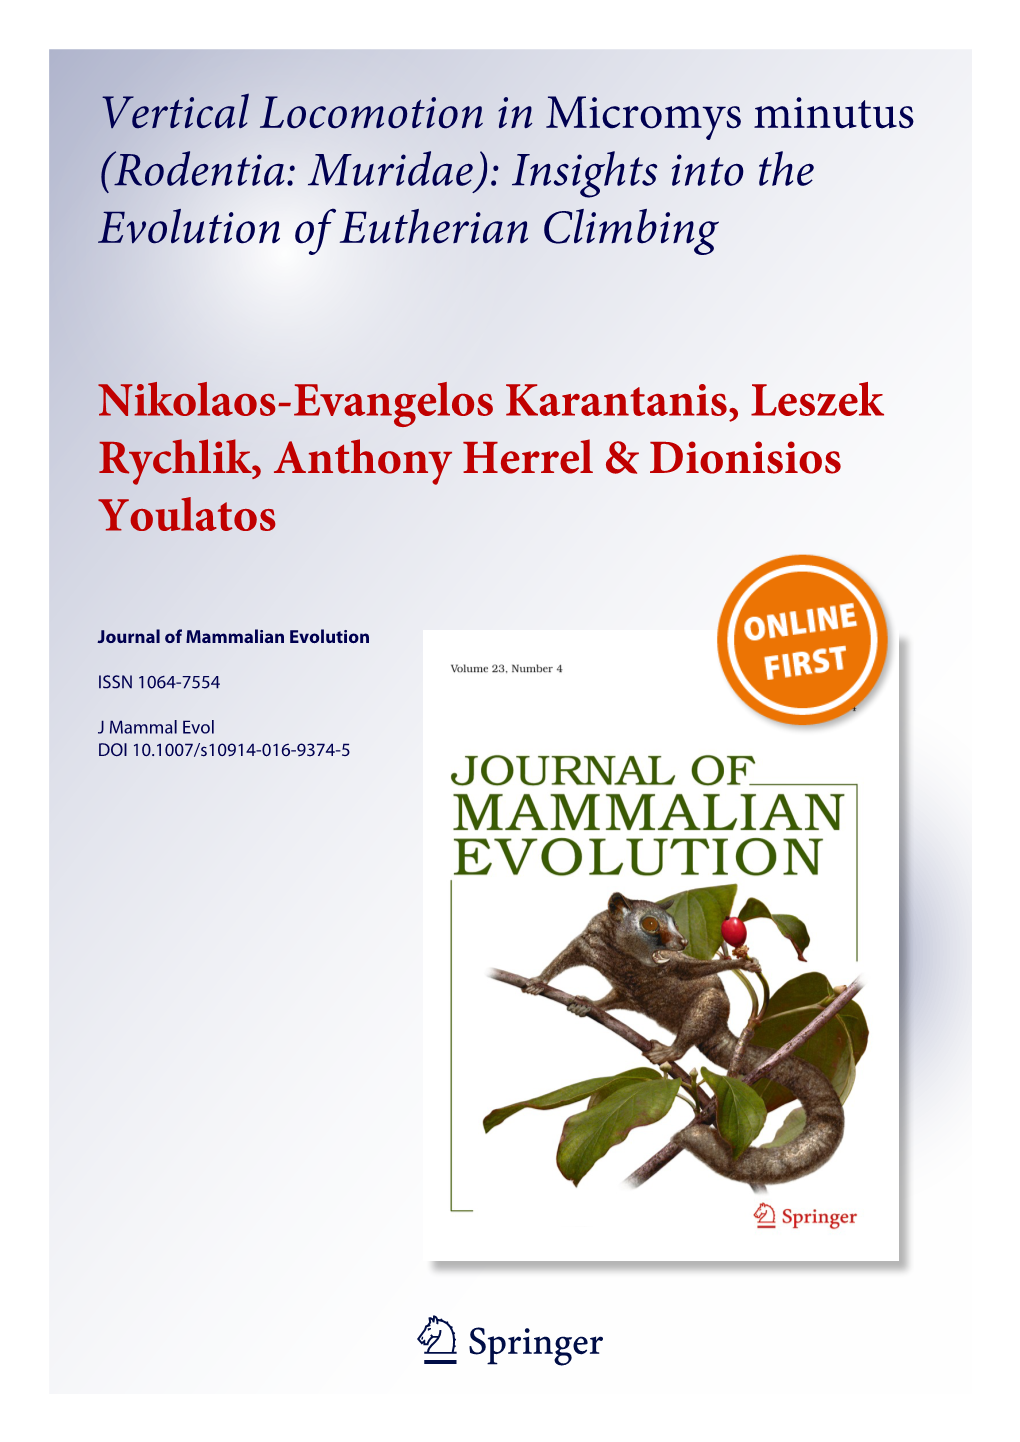 Vertical Locomotion in Micromys Minutus (Rodentia: Muridae): Insights Into the Evolution of Eutherian Climbing